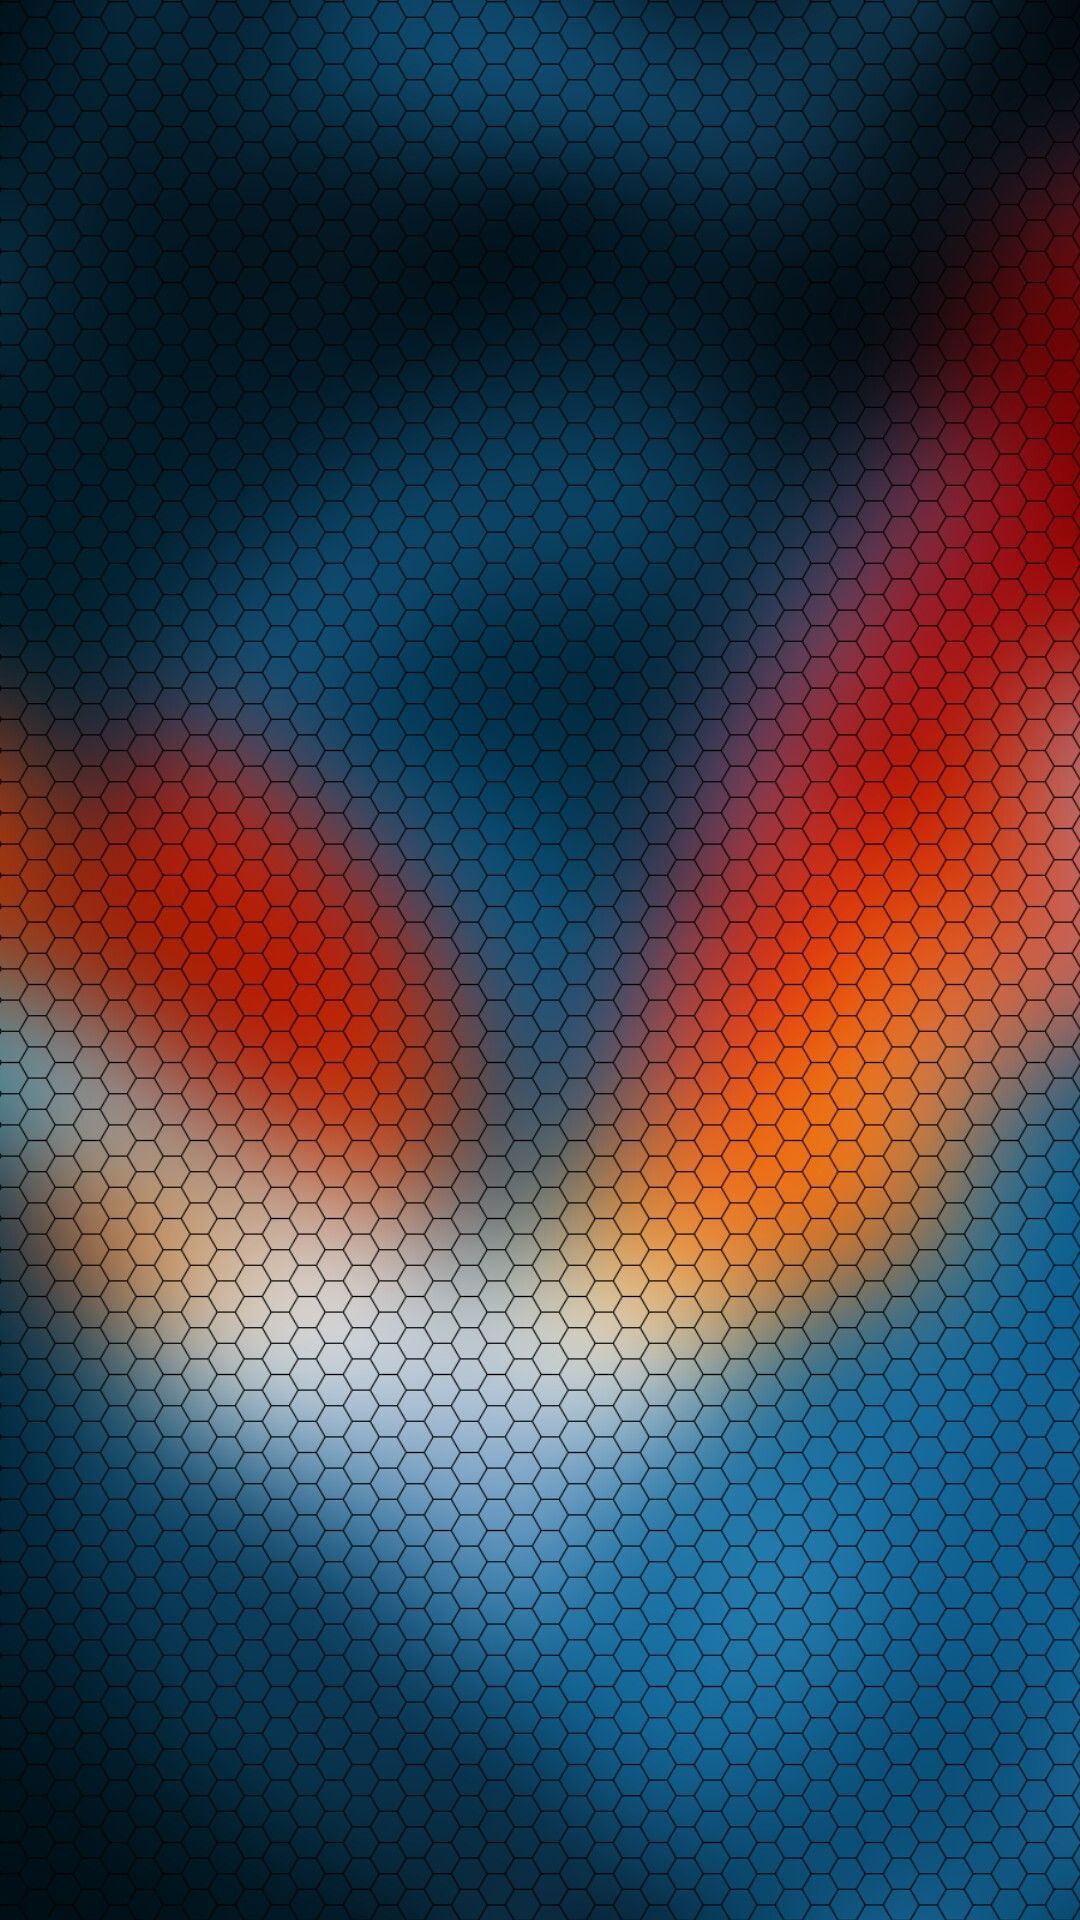 Abstract Blue And Orange Wallpaper Mobile. Phone wallpaper, Background phone wallpaper, Abstract iphone wallpaper